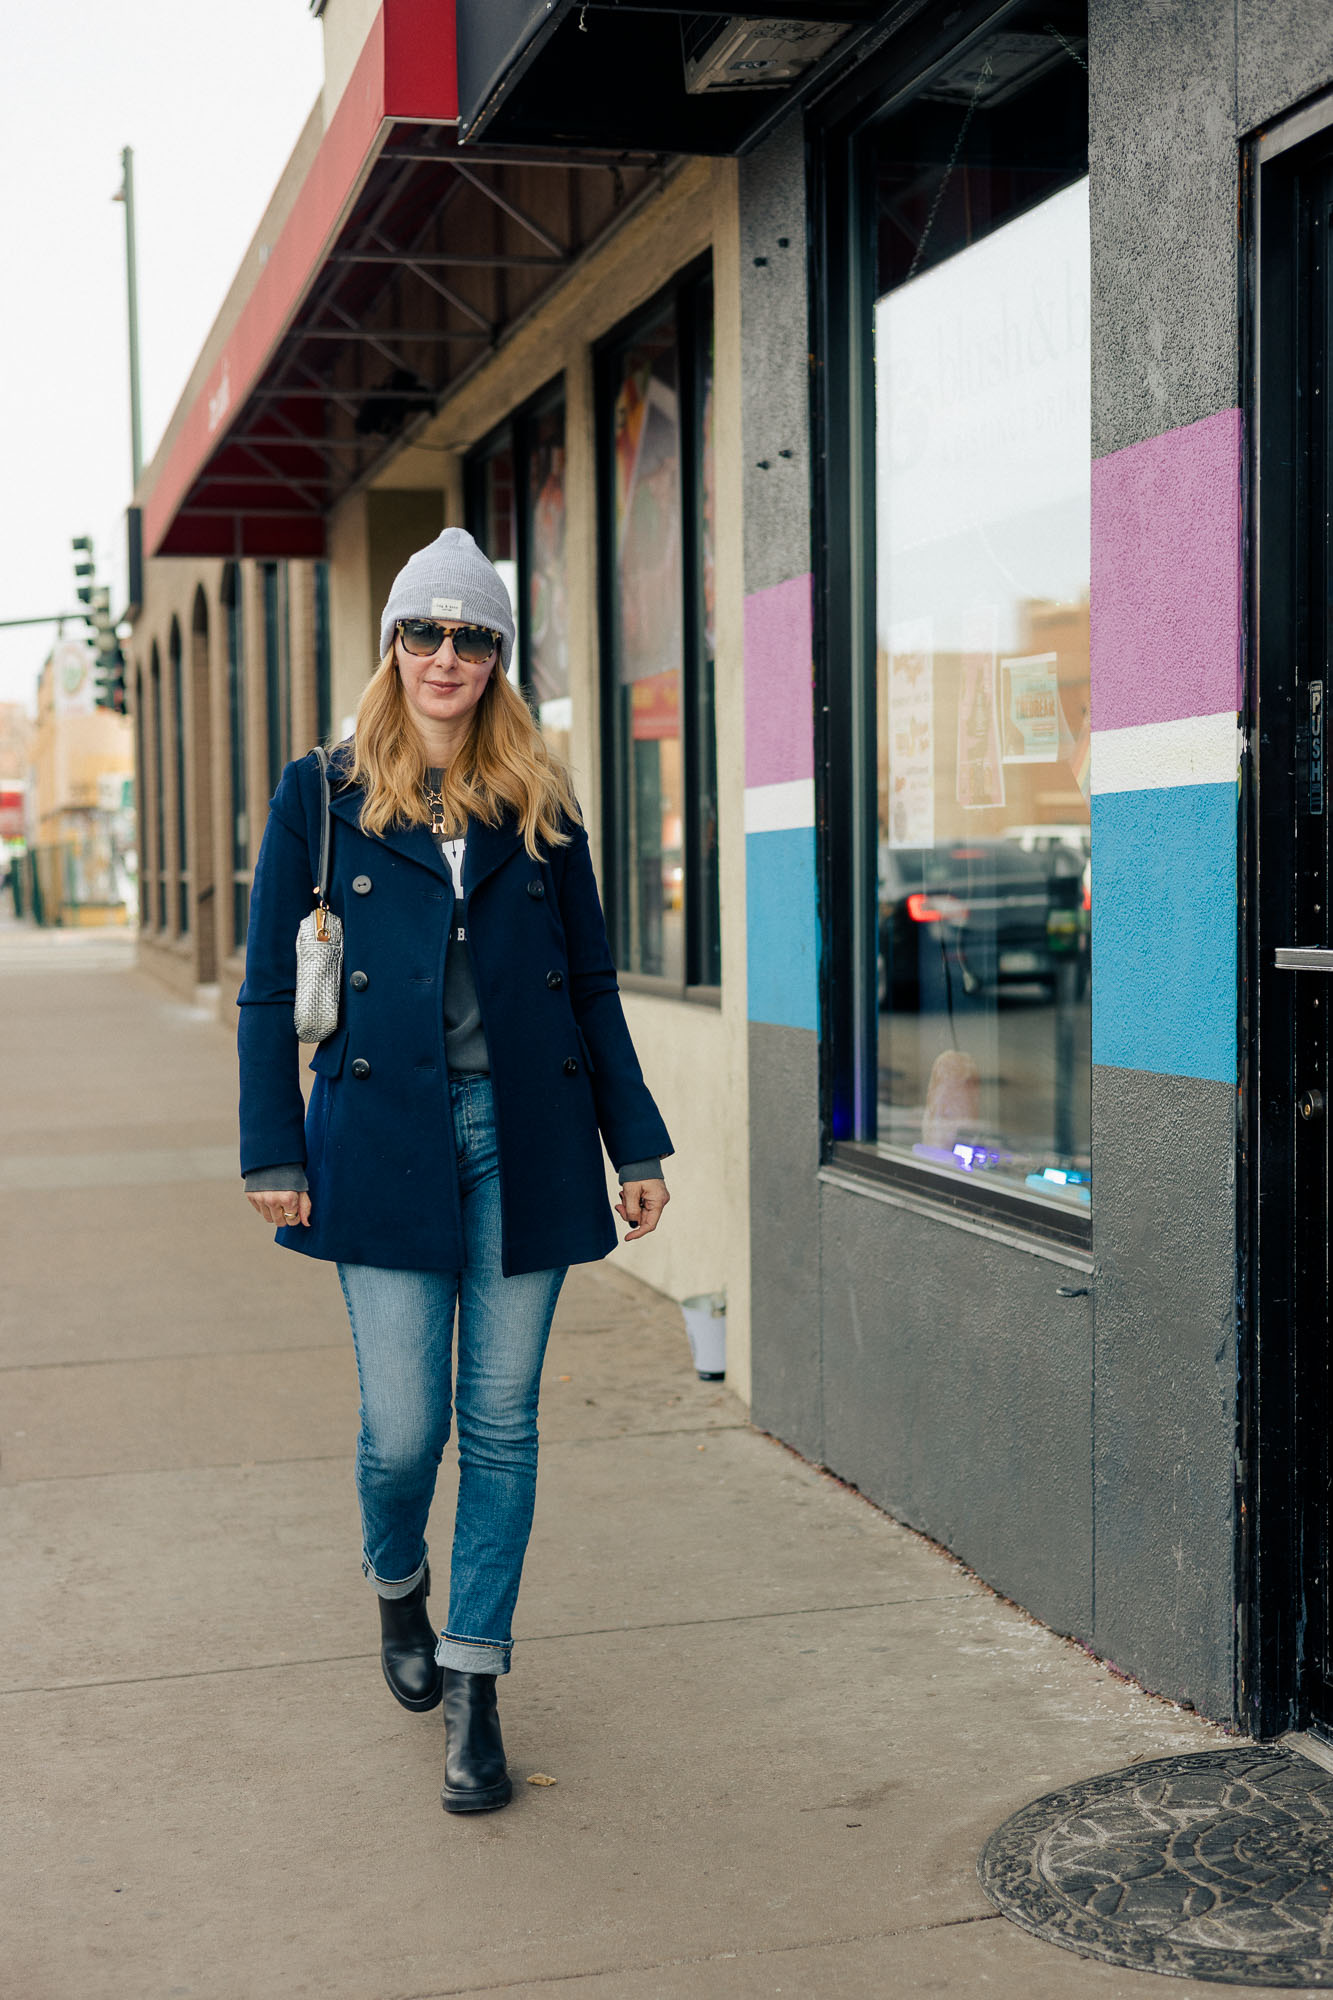 Friday Sale Finds - Wearing a navy Fleurette peacoat with a Rag and Bone beanie, AG jeans and Stuart Weitzman lug boots.